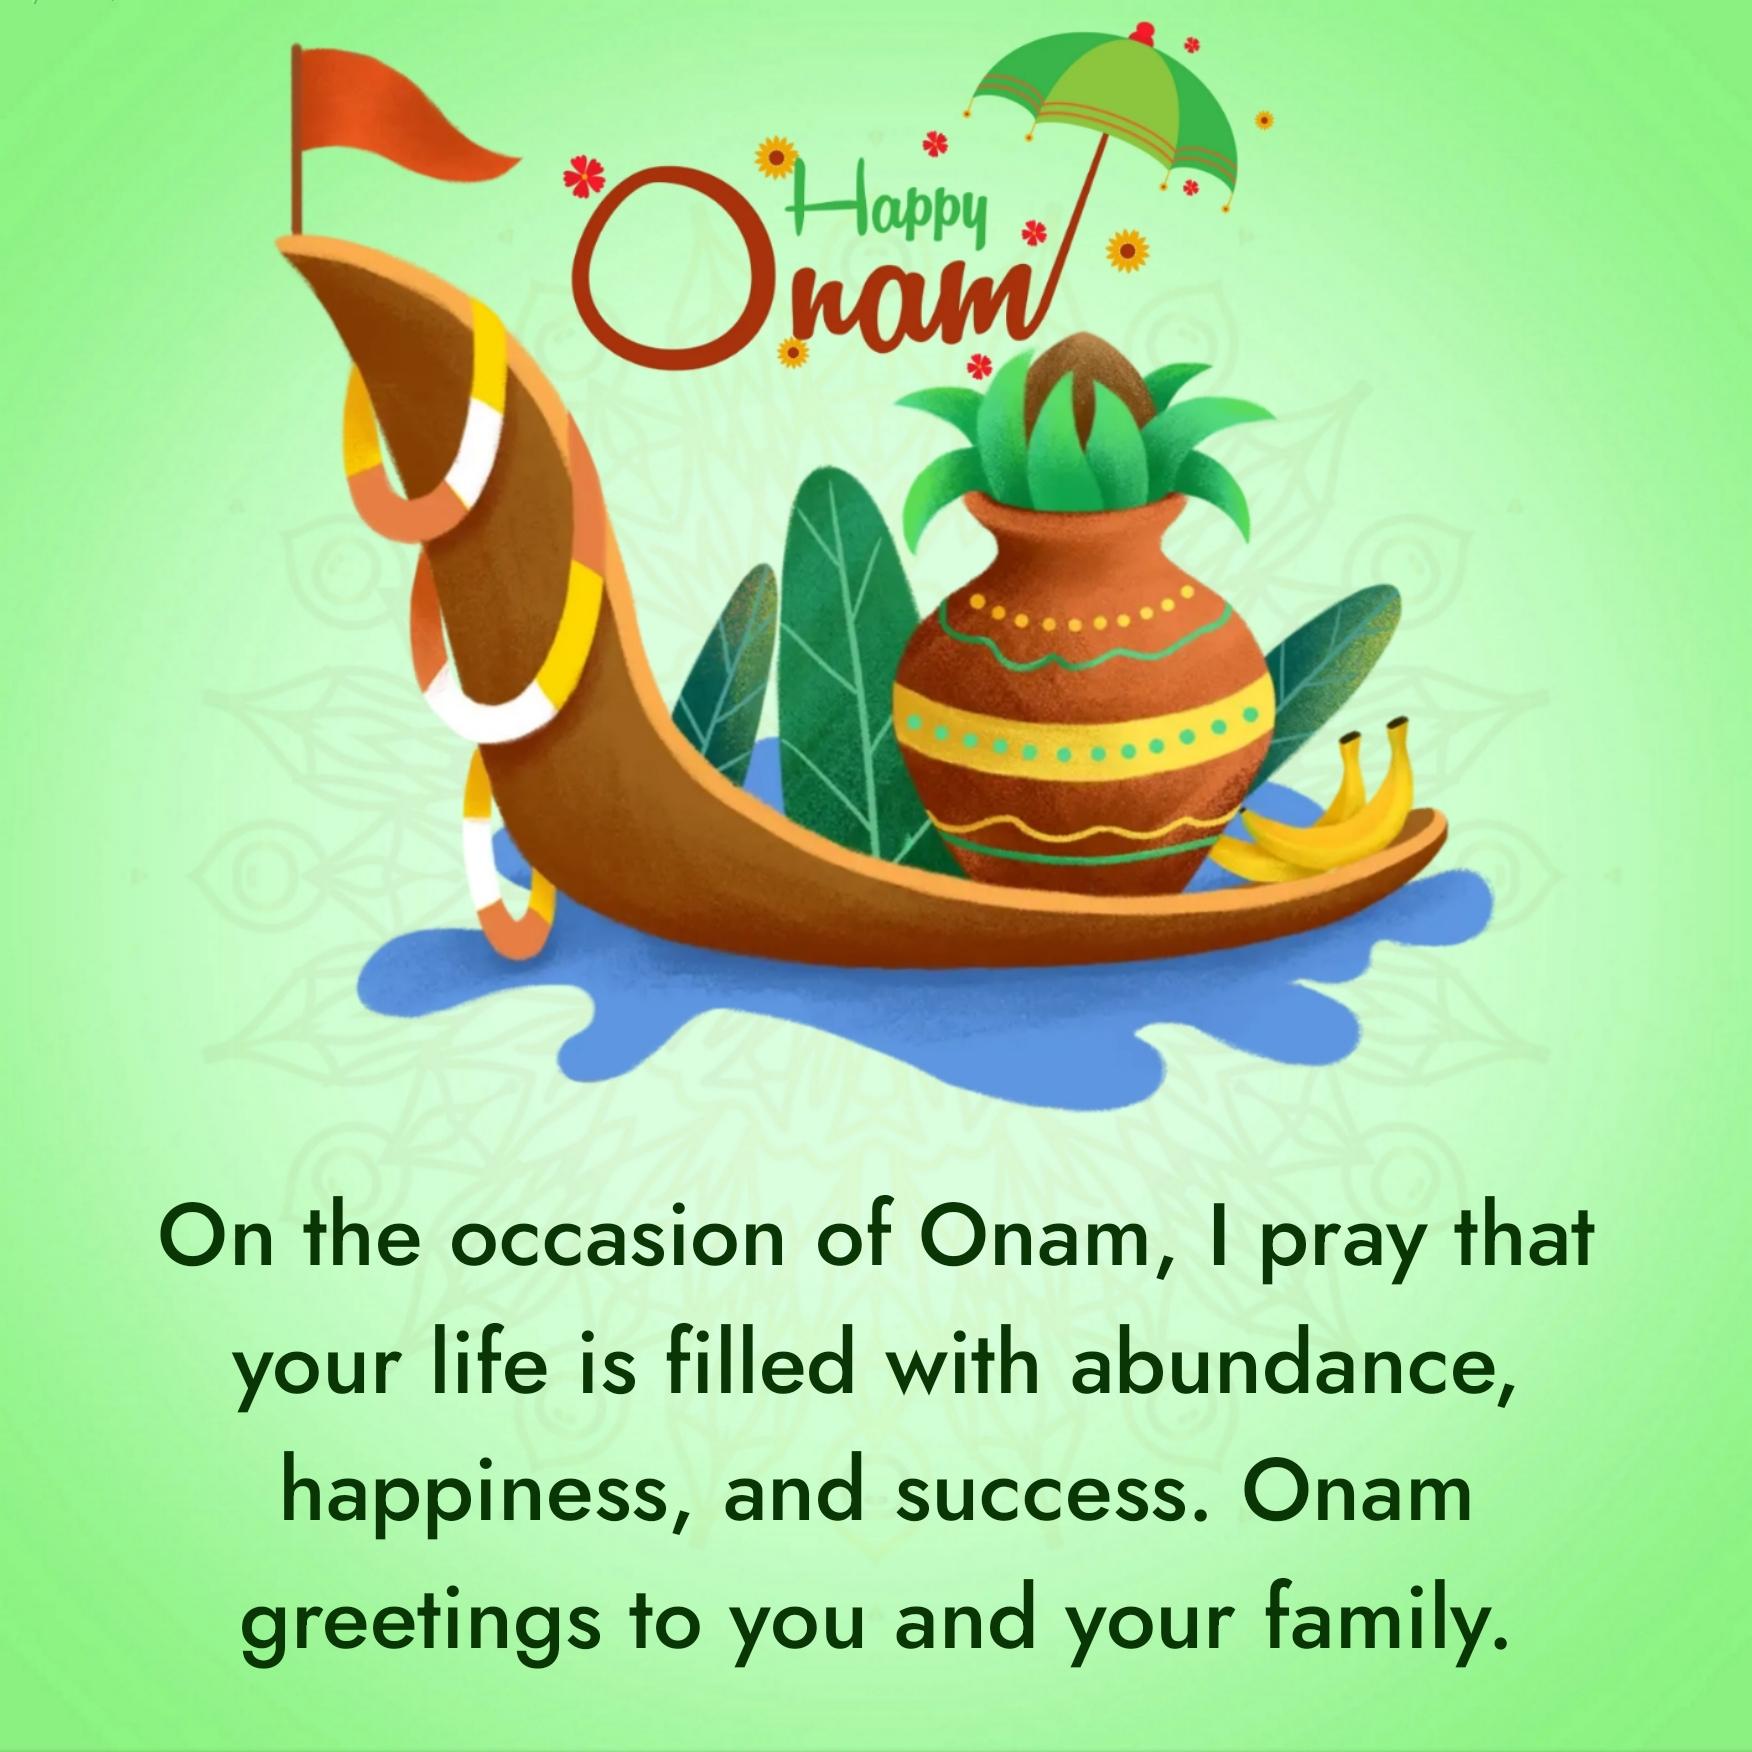 On the occasion of Onam I pray that your life is filled with abundance